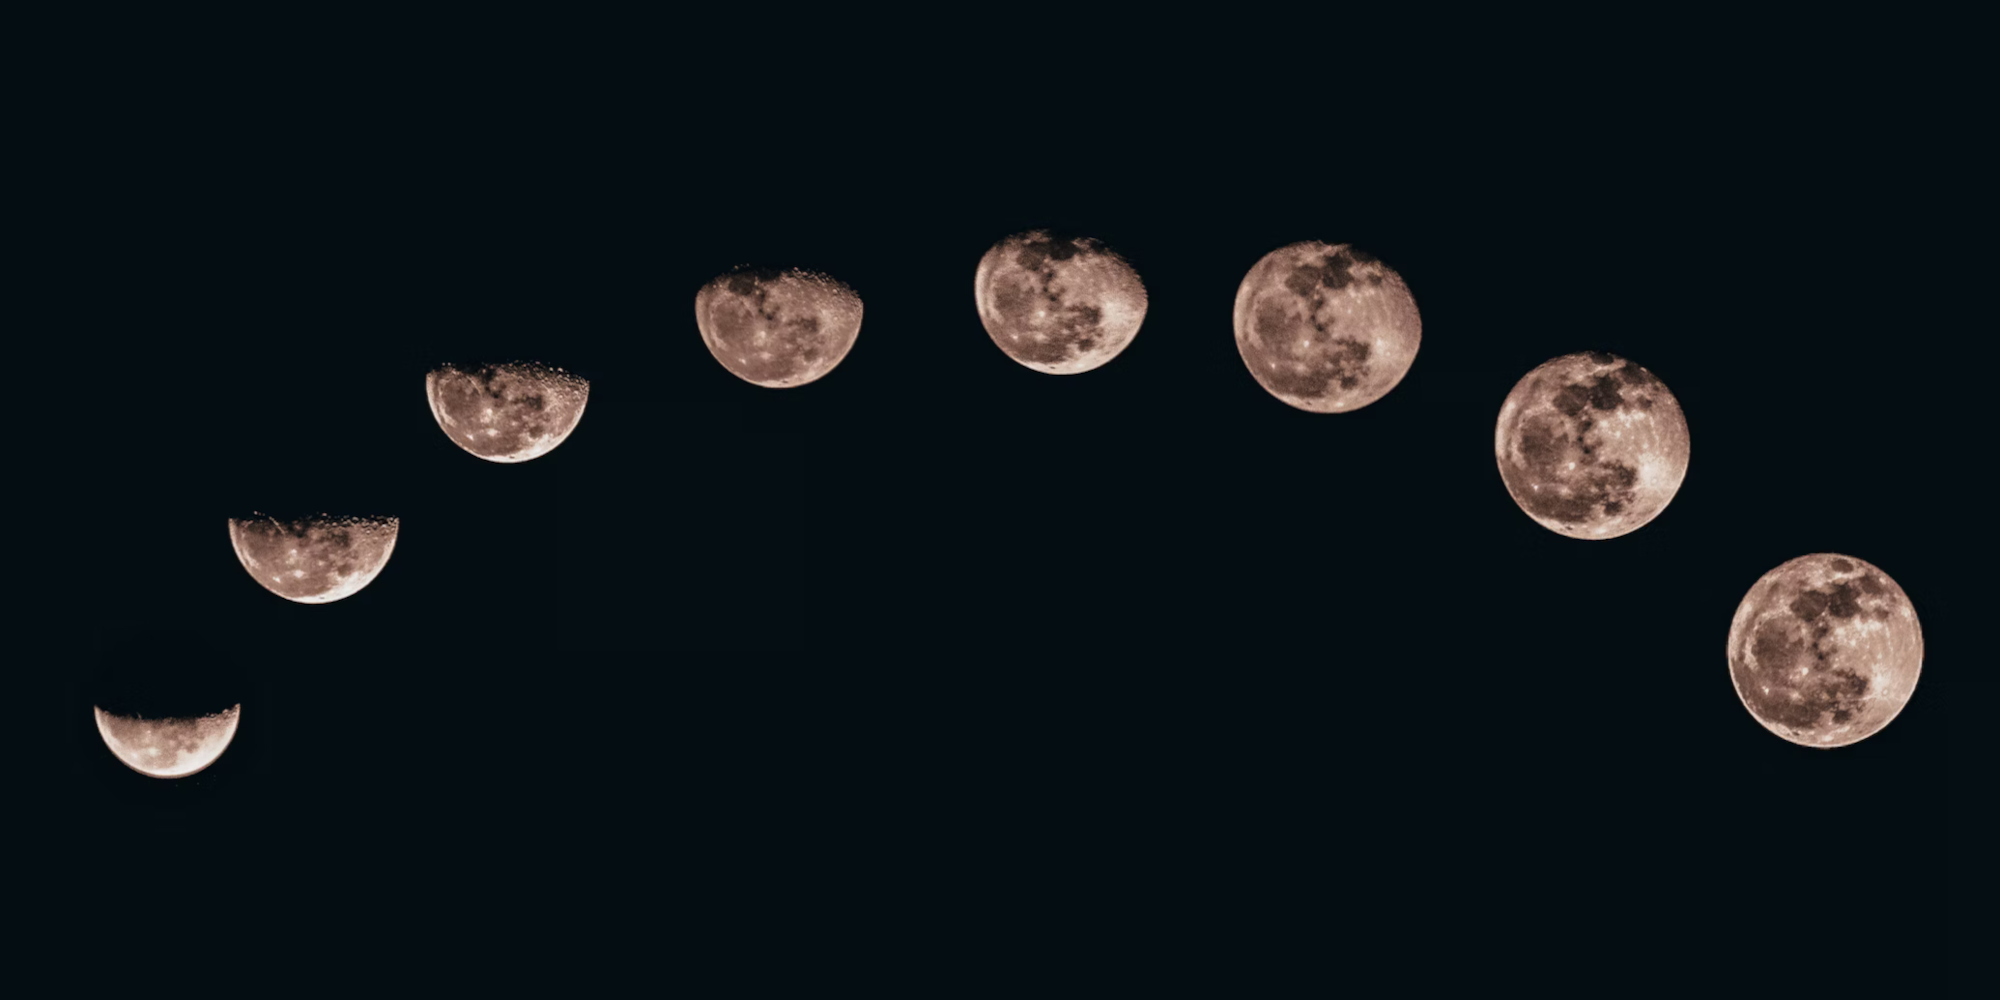 eight images of the moon in different phases against a black background